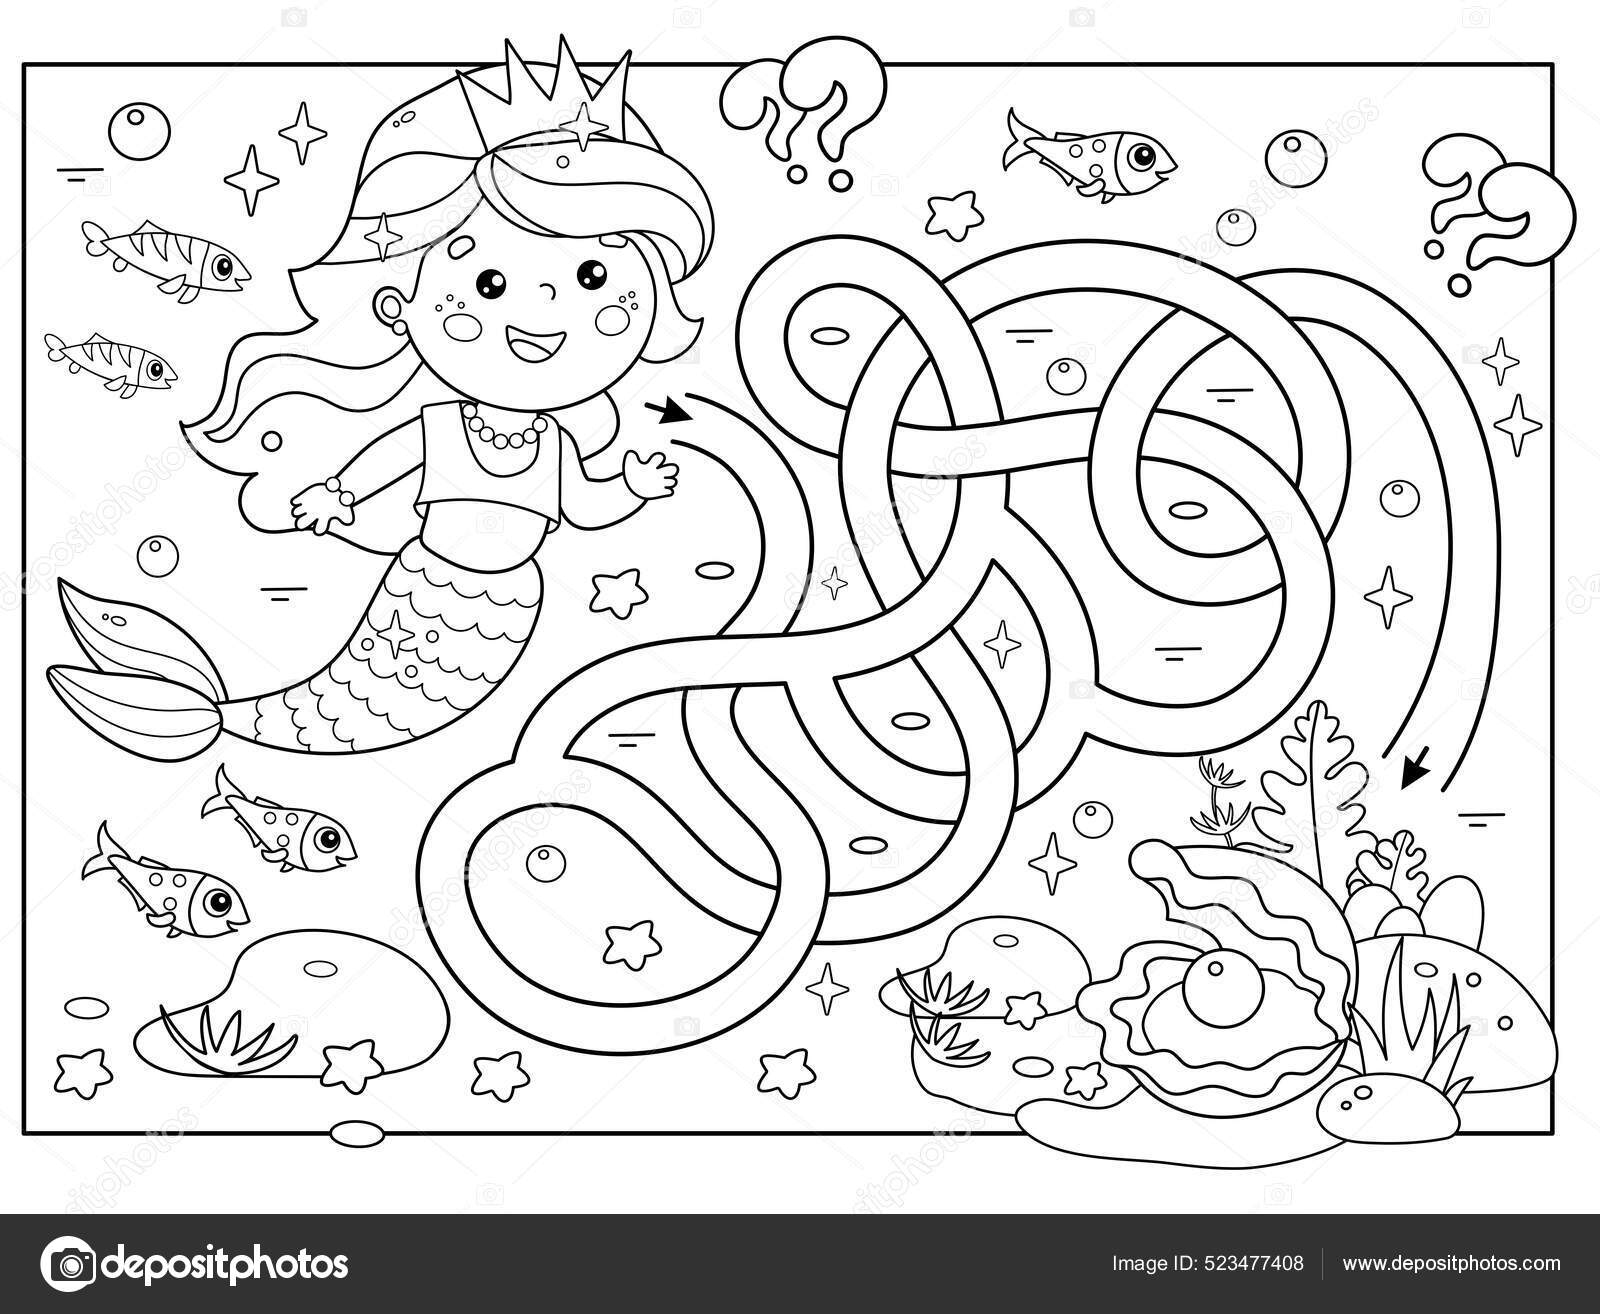 Mermaid Coloring Book for Kids: Activity Book Fun with Mazes, Word Search,  Tic Tac Toe, Dot to Dot, Coloring Pages & Scissor Skills -- 100 Magical